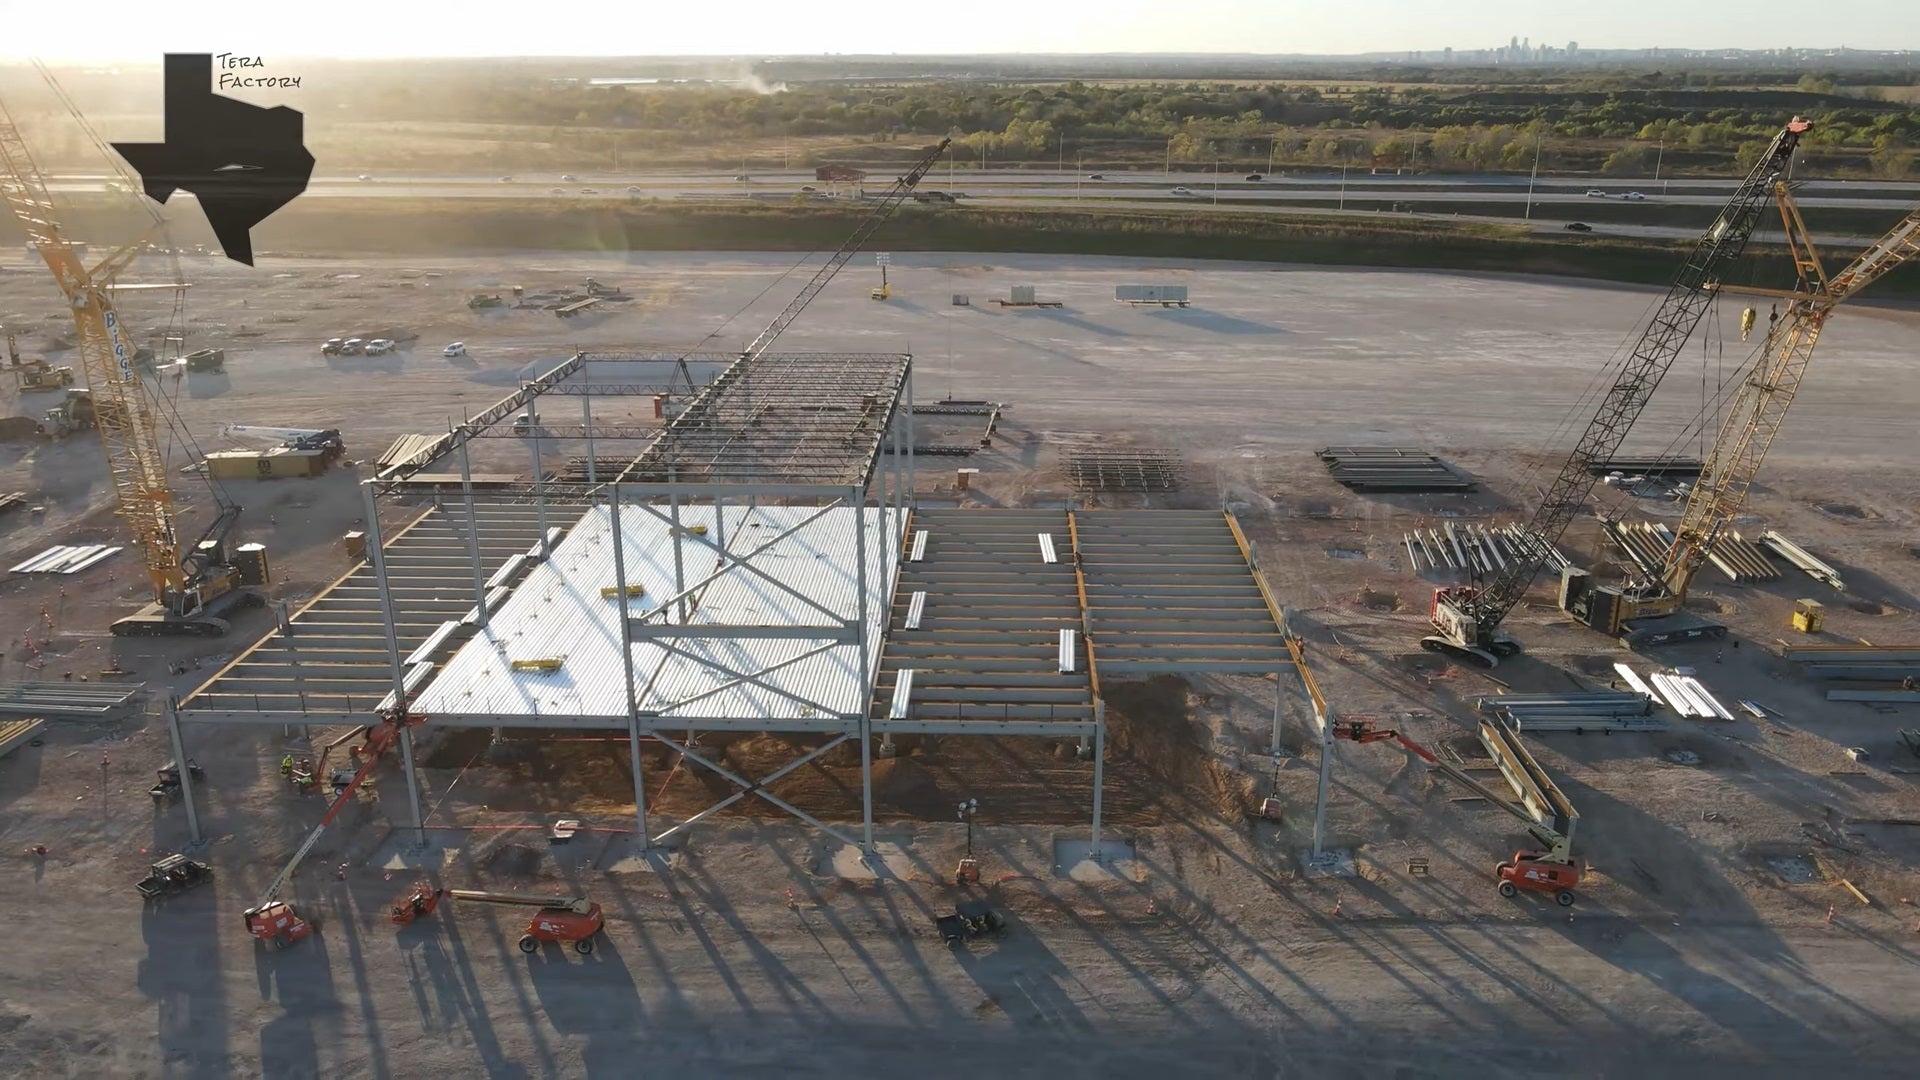 Tesla Giga Texas Construction Speeds Ahead as Footers, Pillars, Beams Go in, & Some Buildings Readying to Take Form